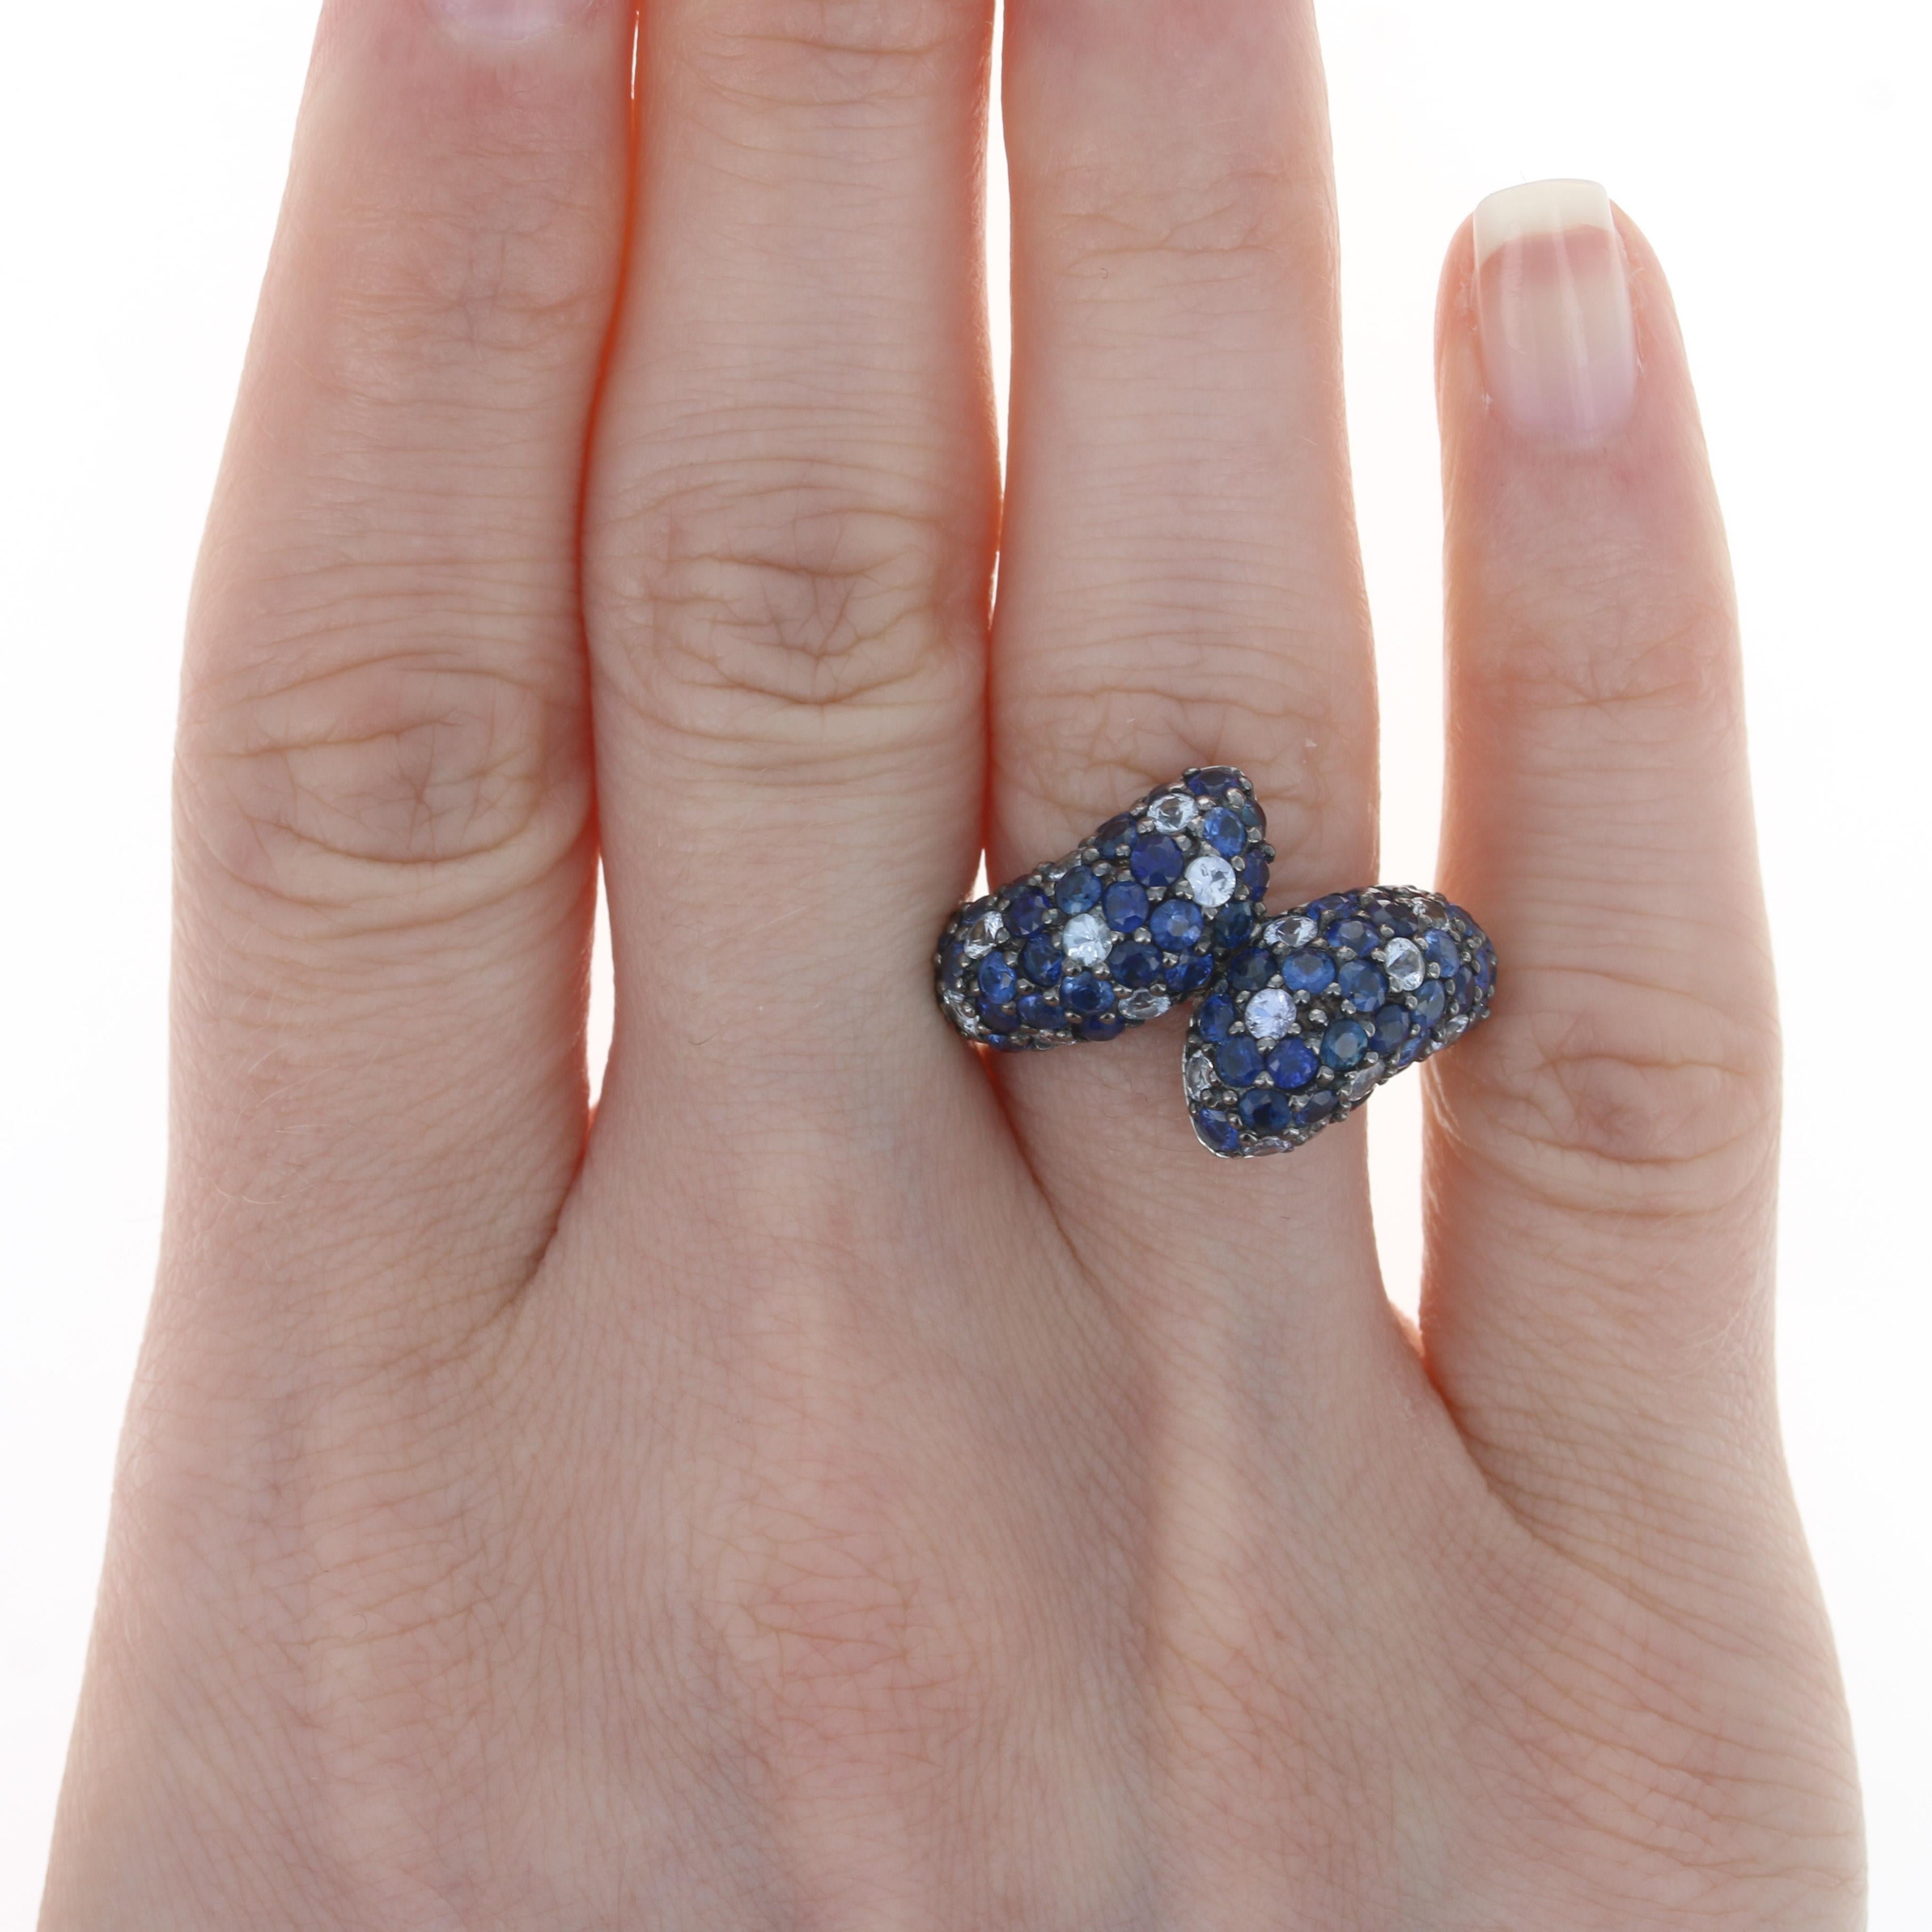 Retail Price: $1,447.50

Size: 7

Brand: Ziba by Le Vian

Metal Content: Sterling Silver

Stone Information
Genuine Sapphires
Treatment: Heating
Total Carats: 4.65ctw
Cut: Round
Colors: Blue & White

Style: Cluster Bypass

Measurements
Face Height